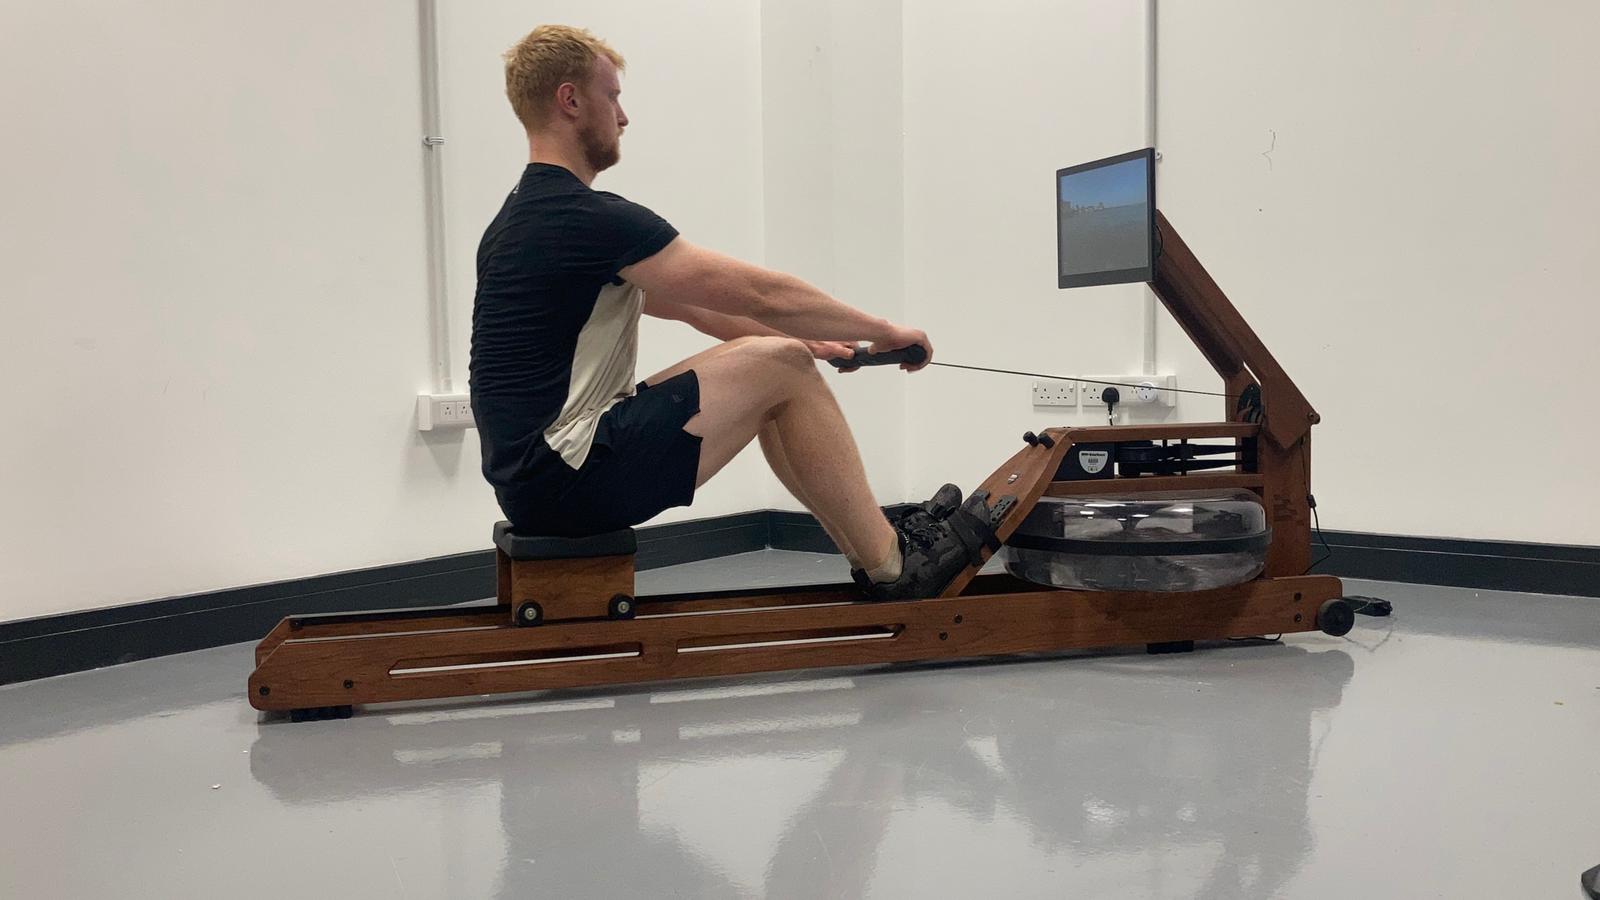 Ergatta Rower has been tested by a Live Science writer